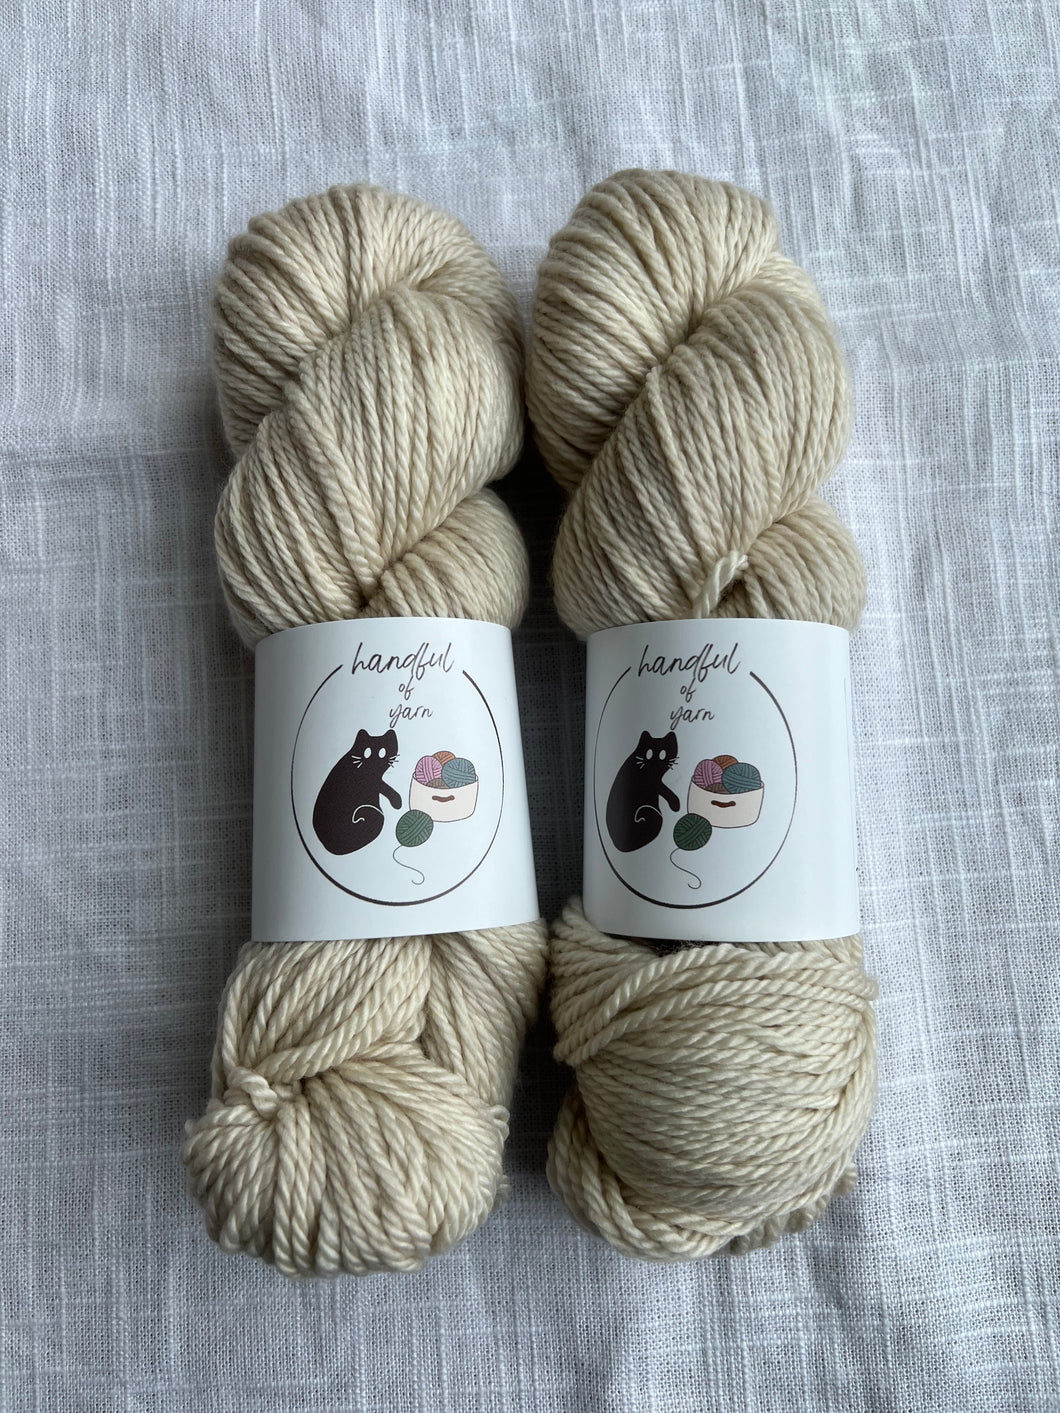 Turnip Head - In Stock (Soft Worsted, dye issue)